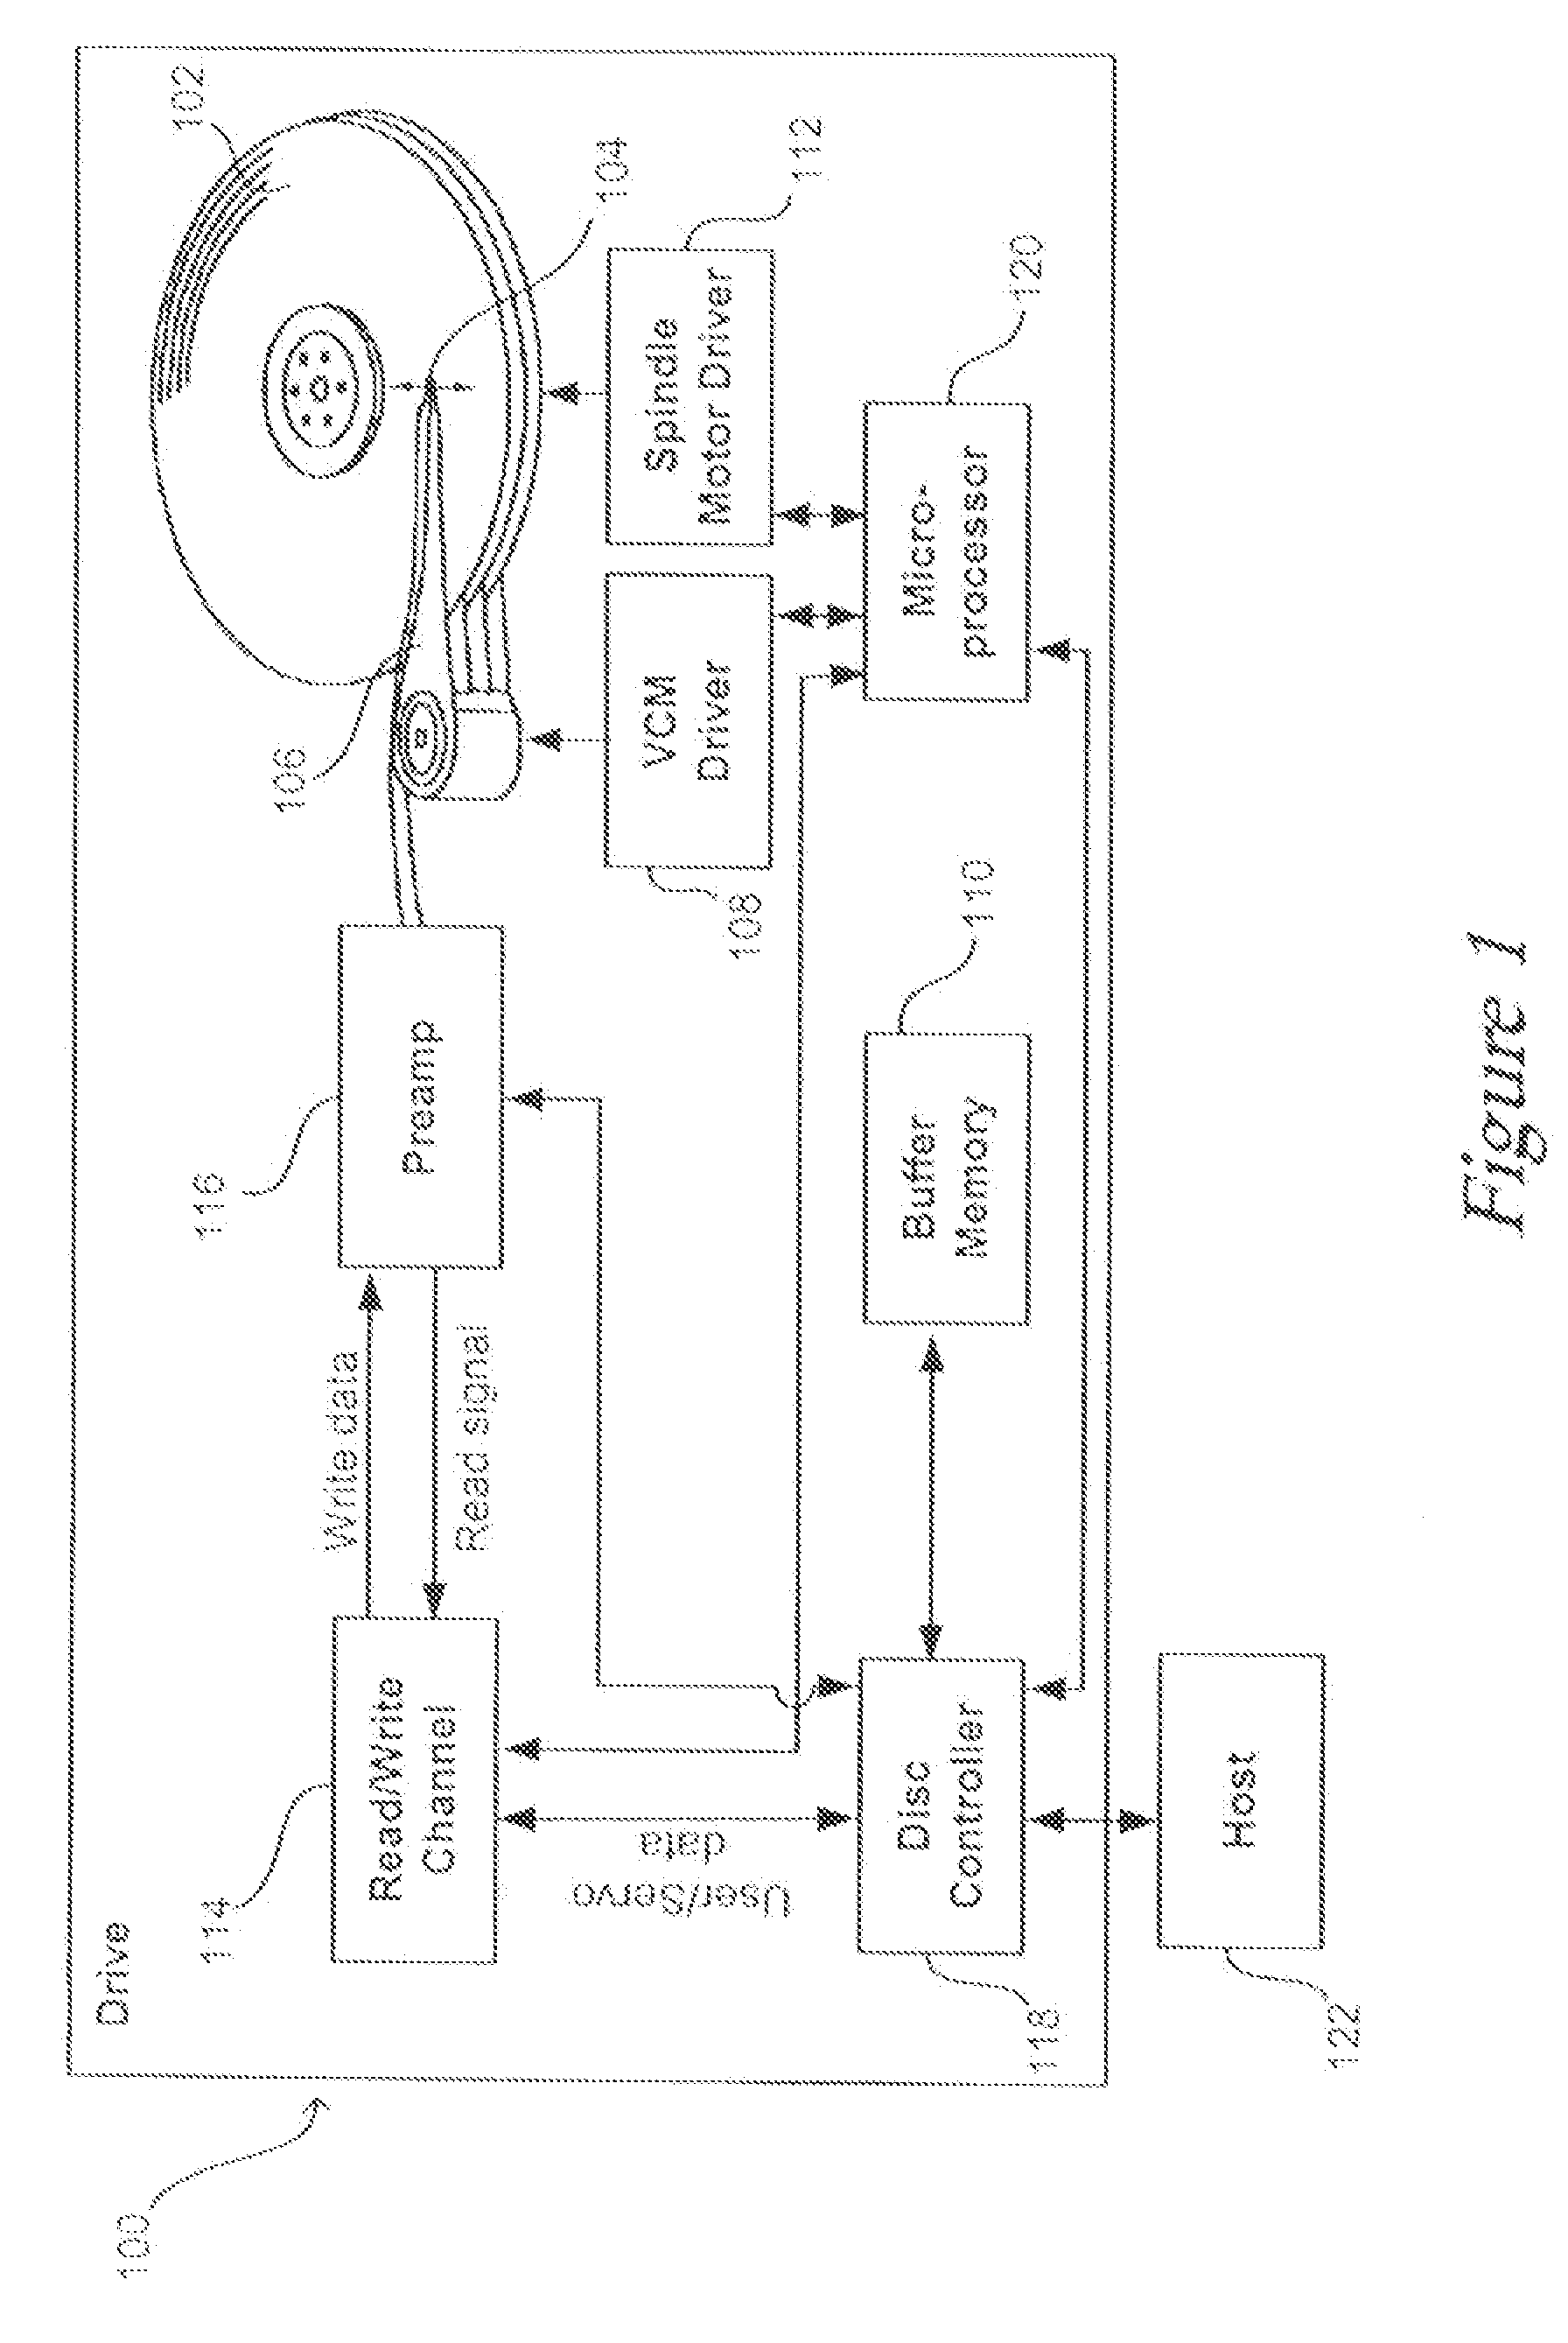 Systems for Self-Servowriting in Multiple Portions with Multiple Passes Per Servowriting Step